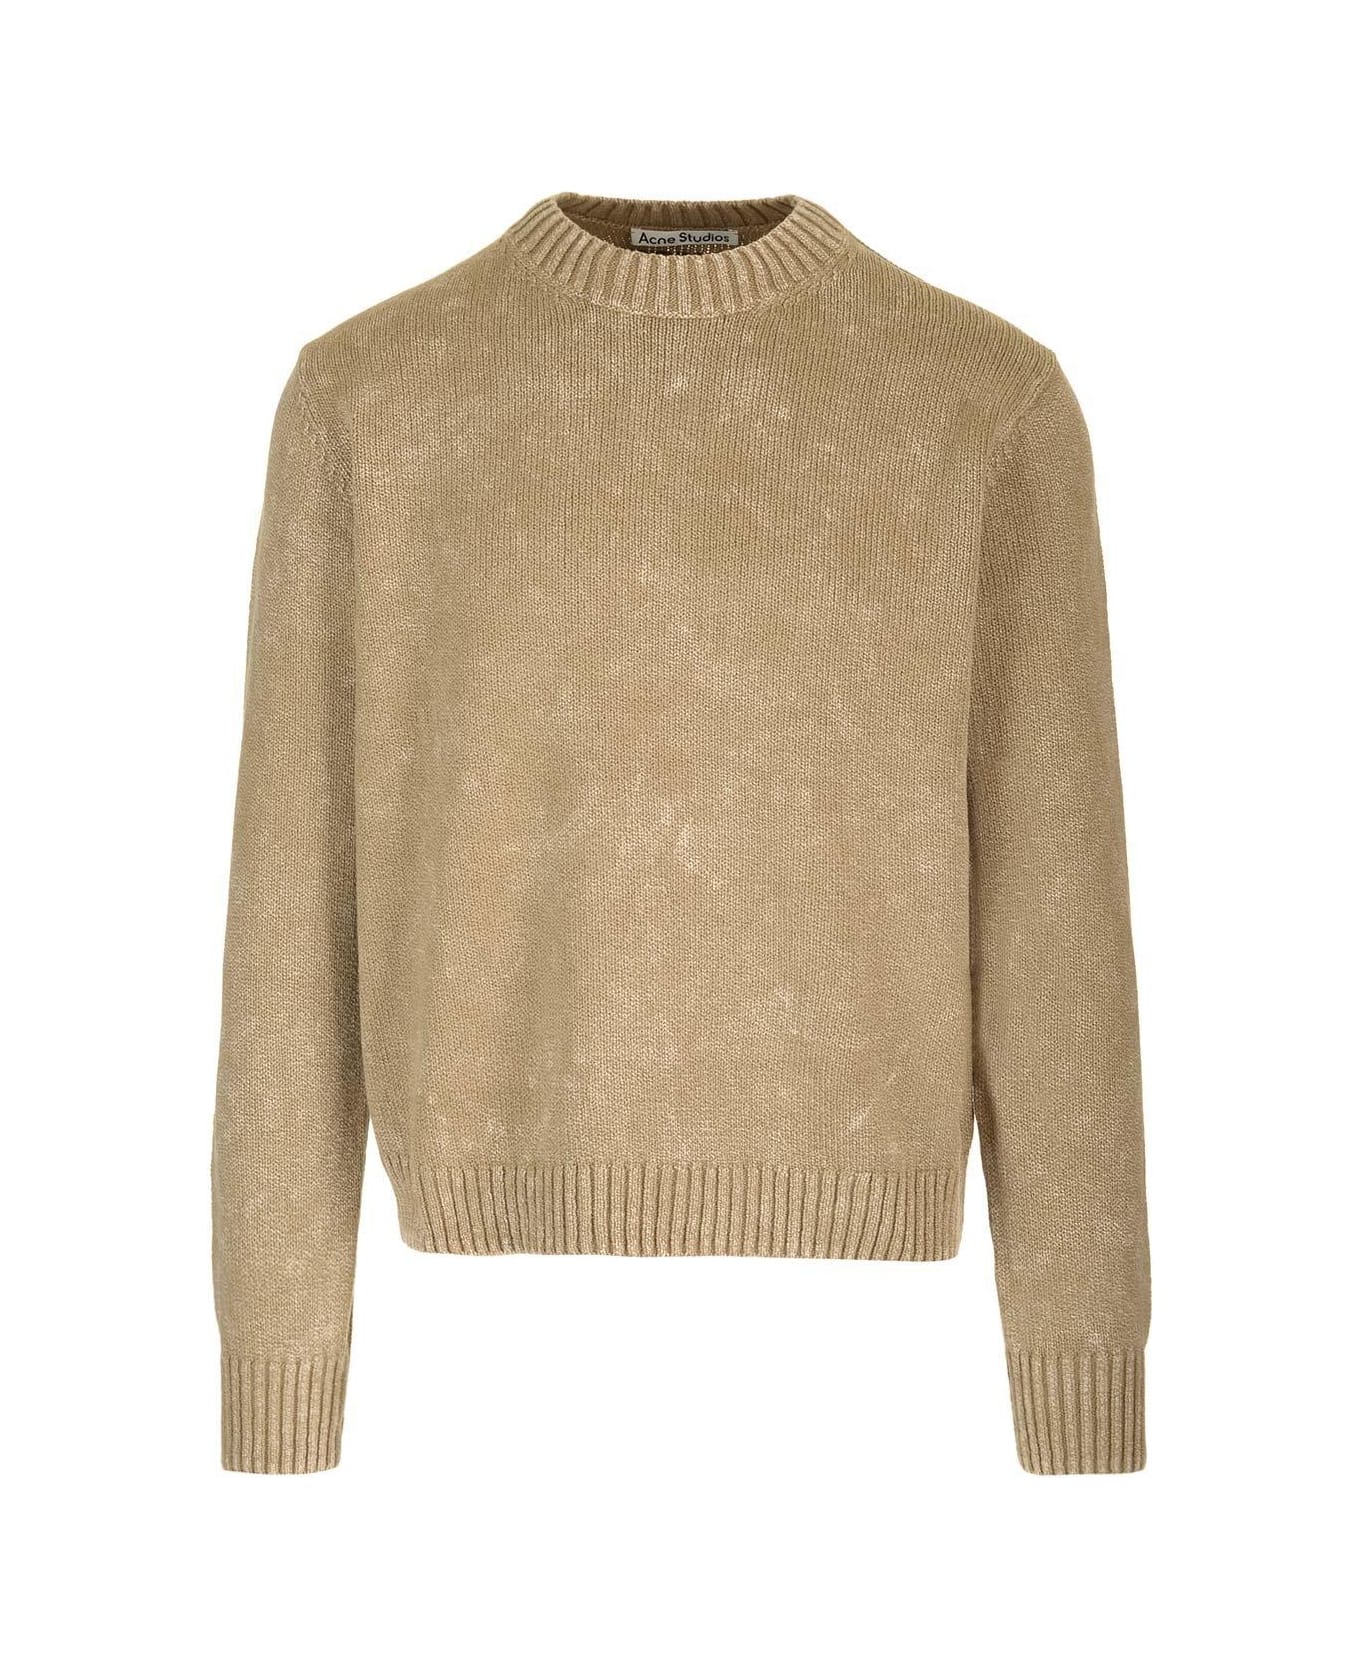 Acne Studios Knitted Sweater - Green